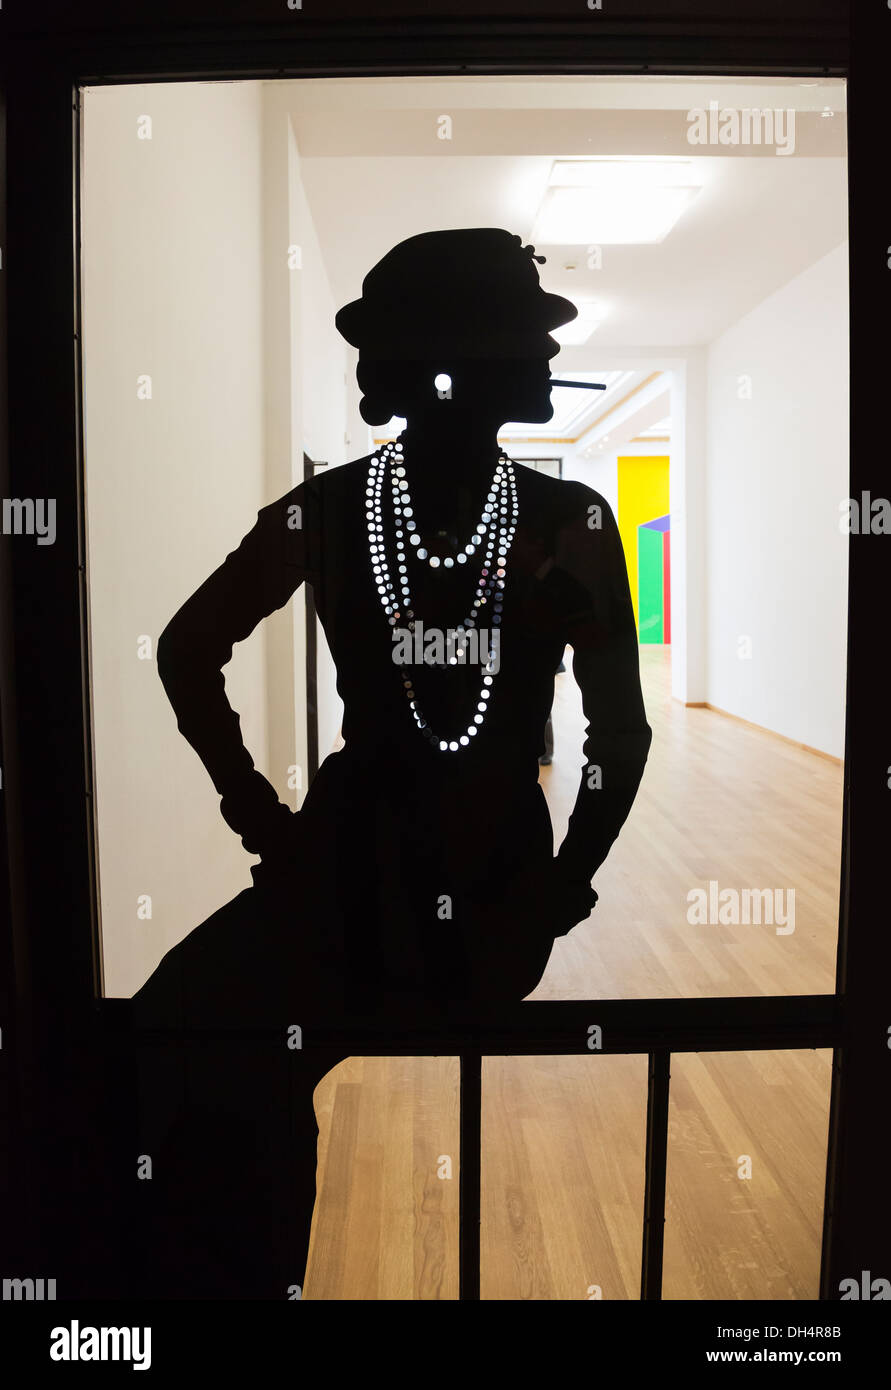 Silhouette of Coco Chanel smoking a cigarette at the Chanel exhibition at the Gemeentemuseum, The Hague, Holland Stock Photo